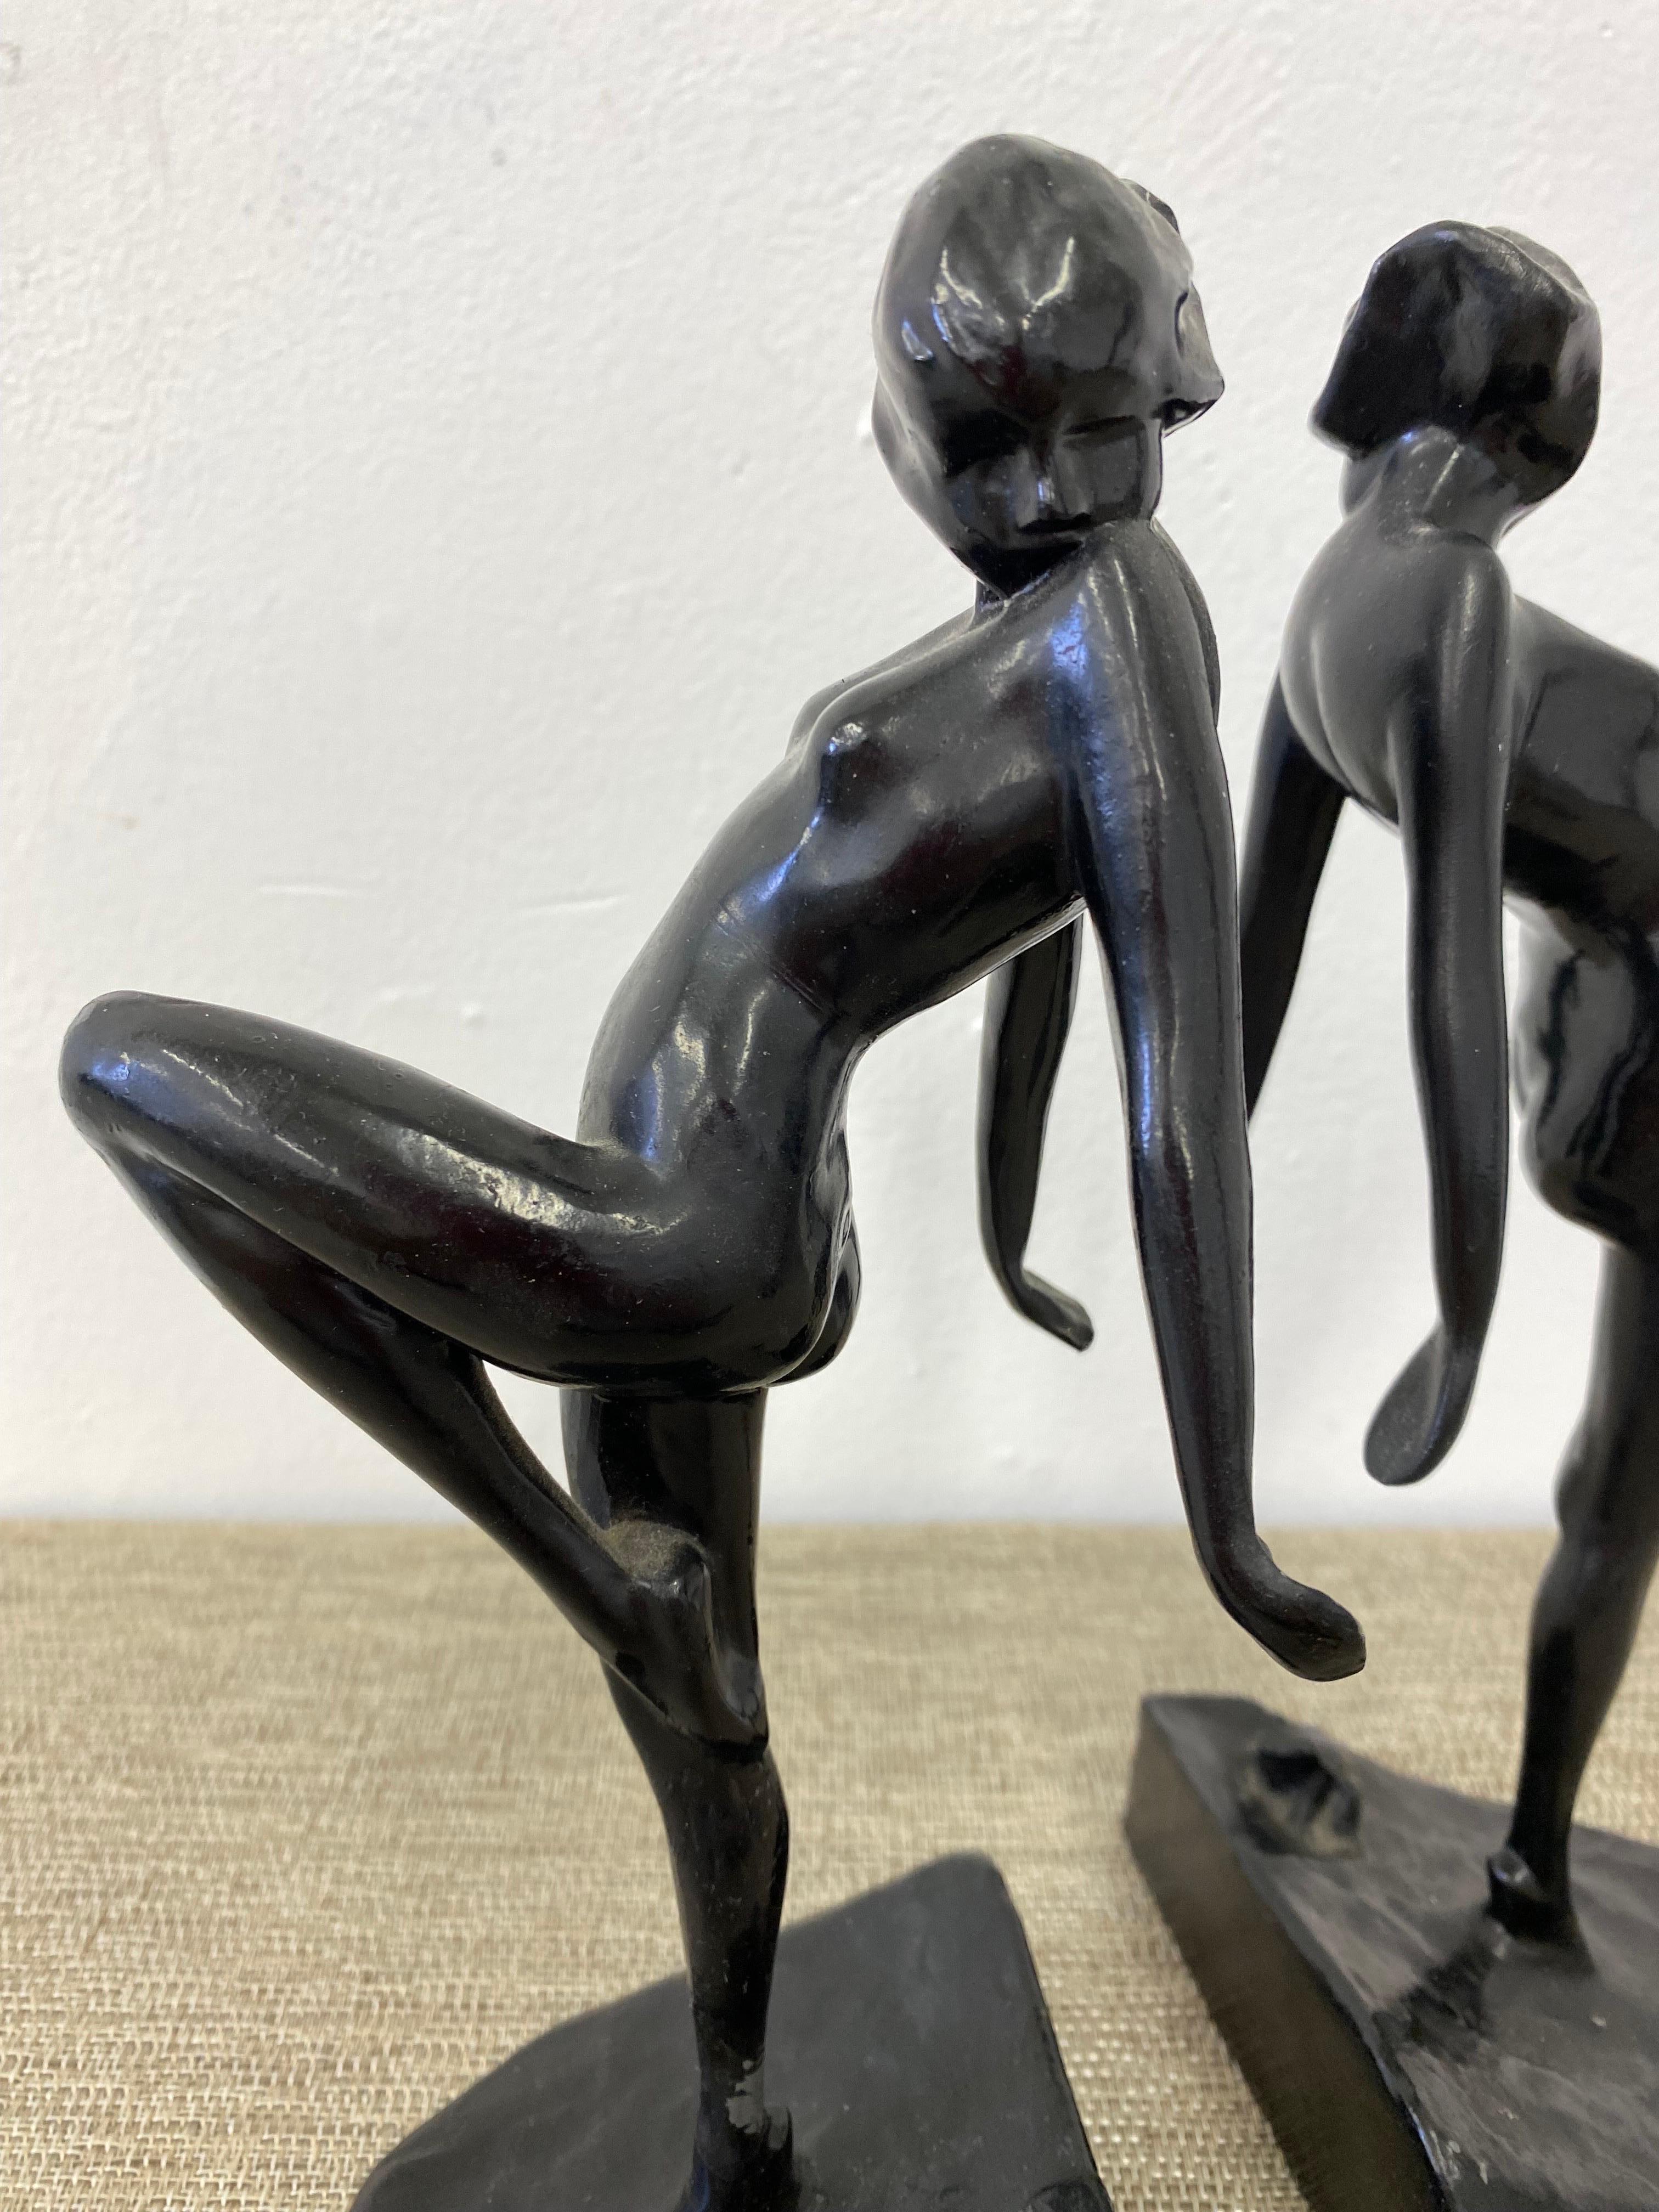 Frankart standing Nude lady frog bookends N0 B401 with their original black paint finish. Overall in nice condition with a few areas of paint loss. Classic Pose and look! One of Franenberg's most classic designs!